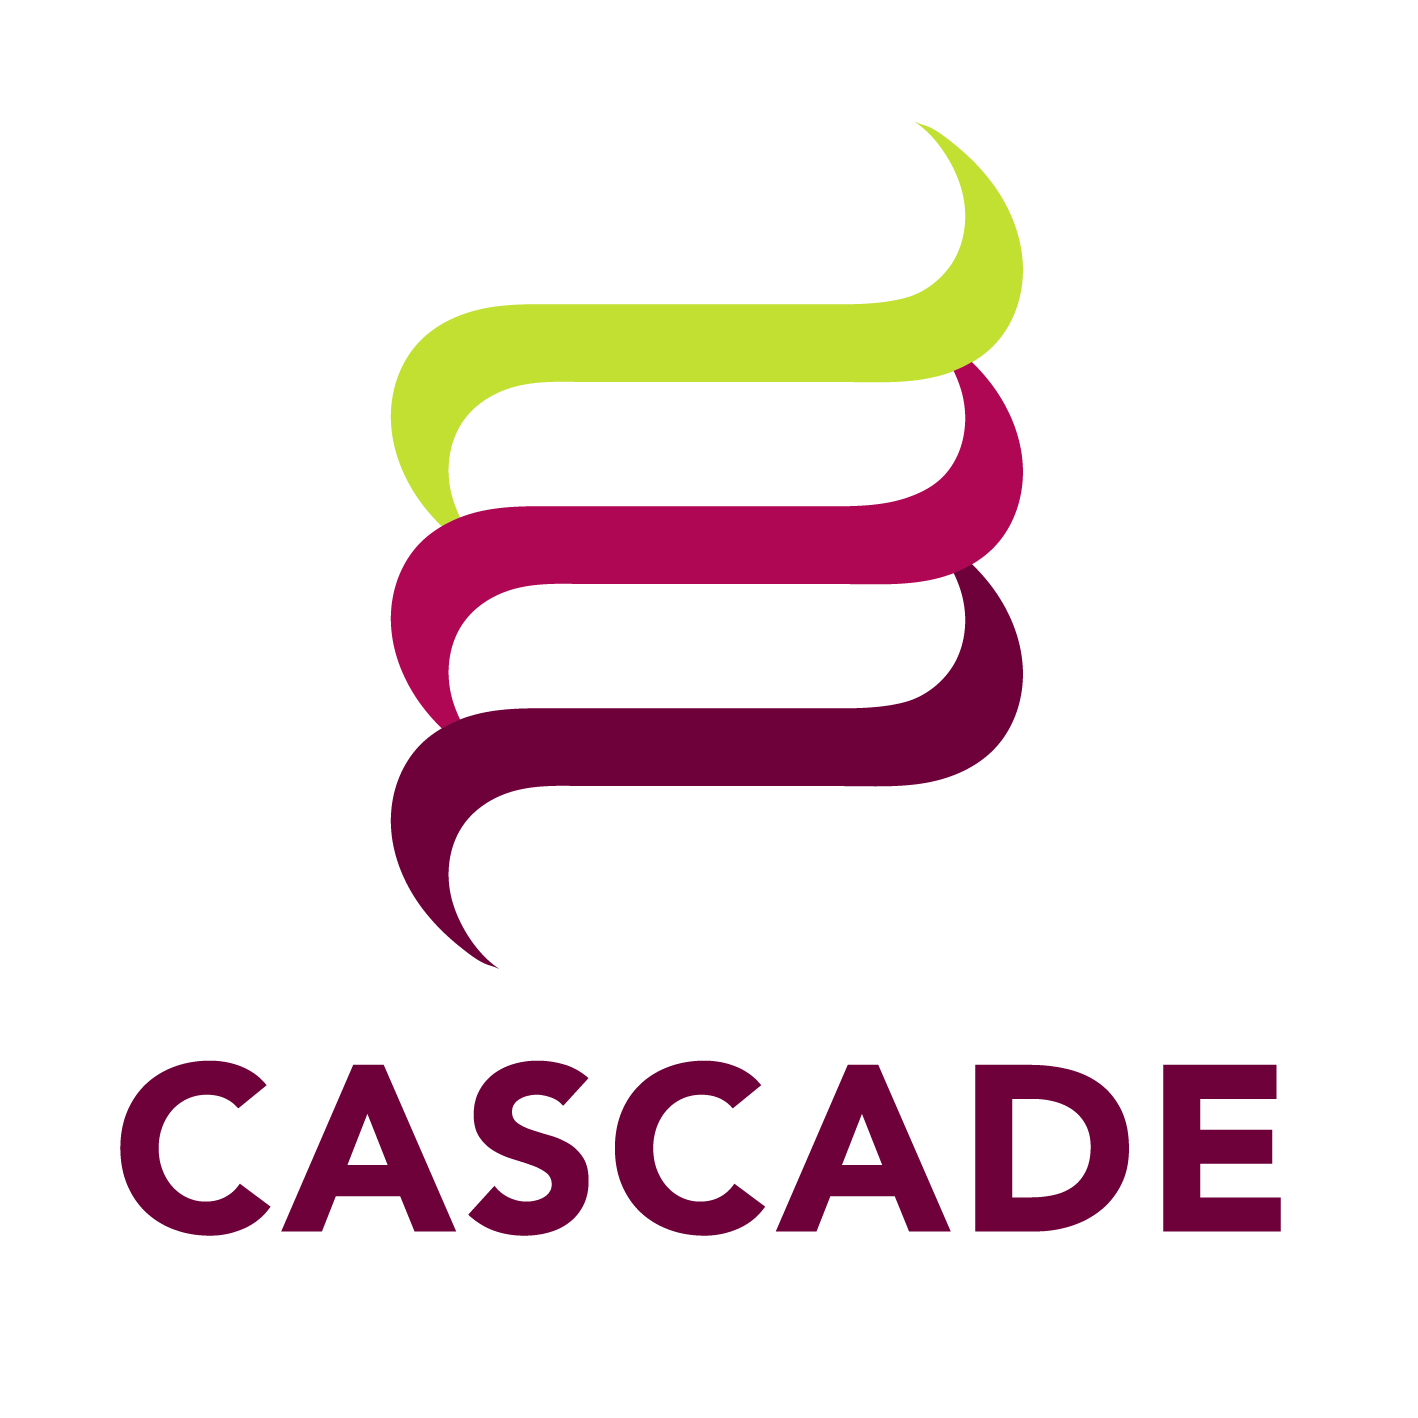 About us – CASCADE